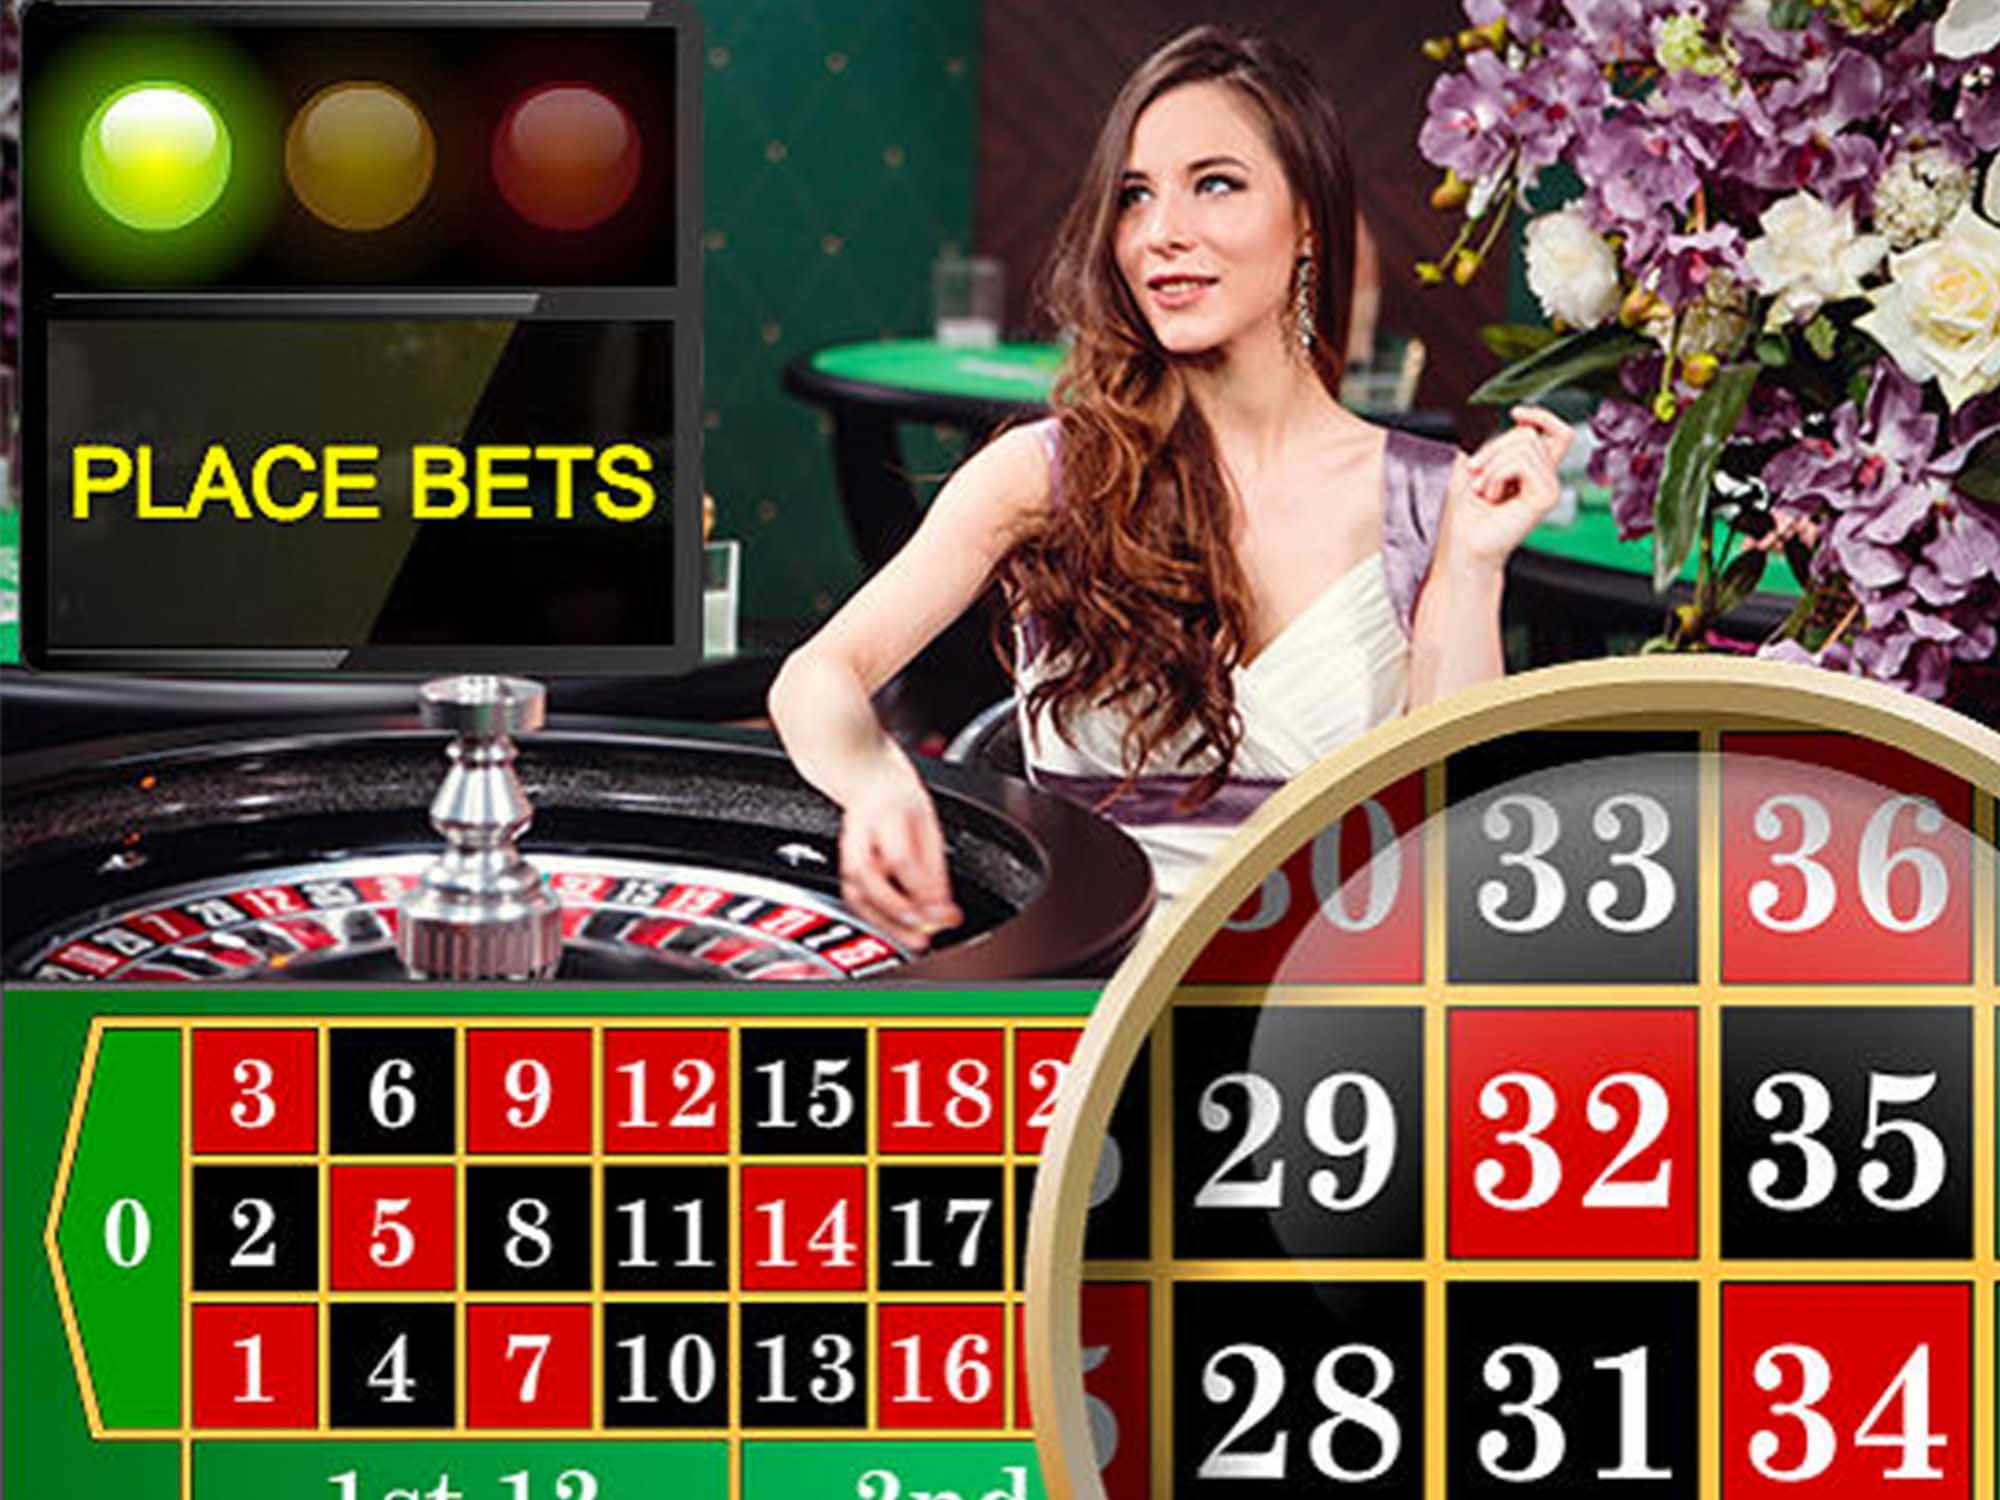 Live Roulette Sites Ireland Gaming